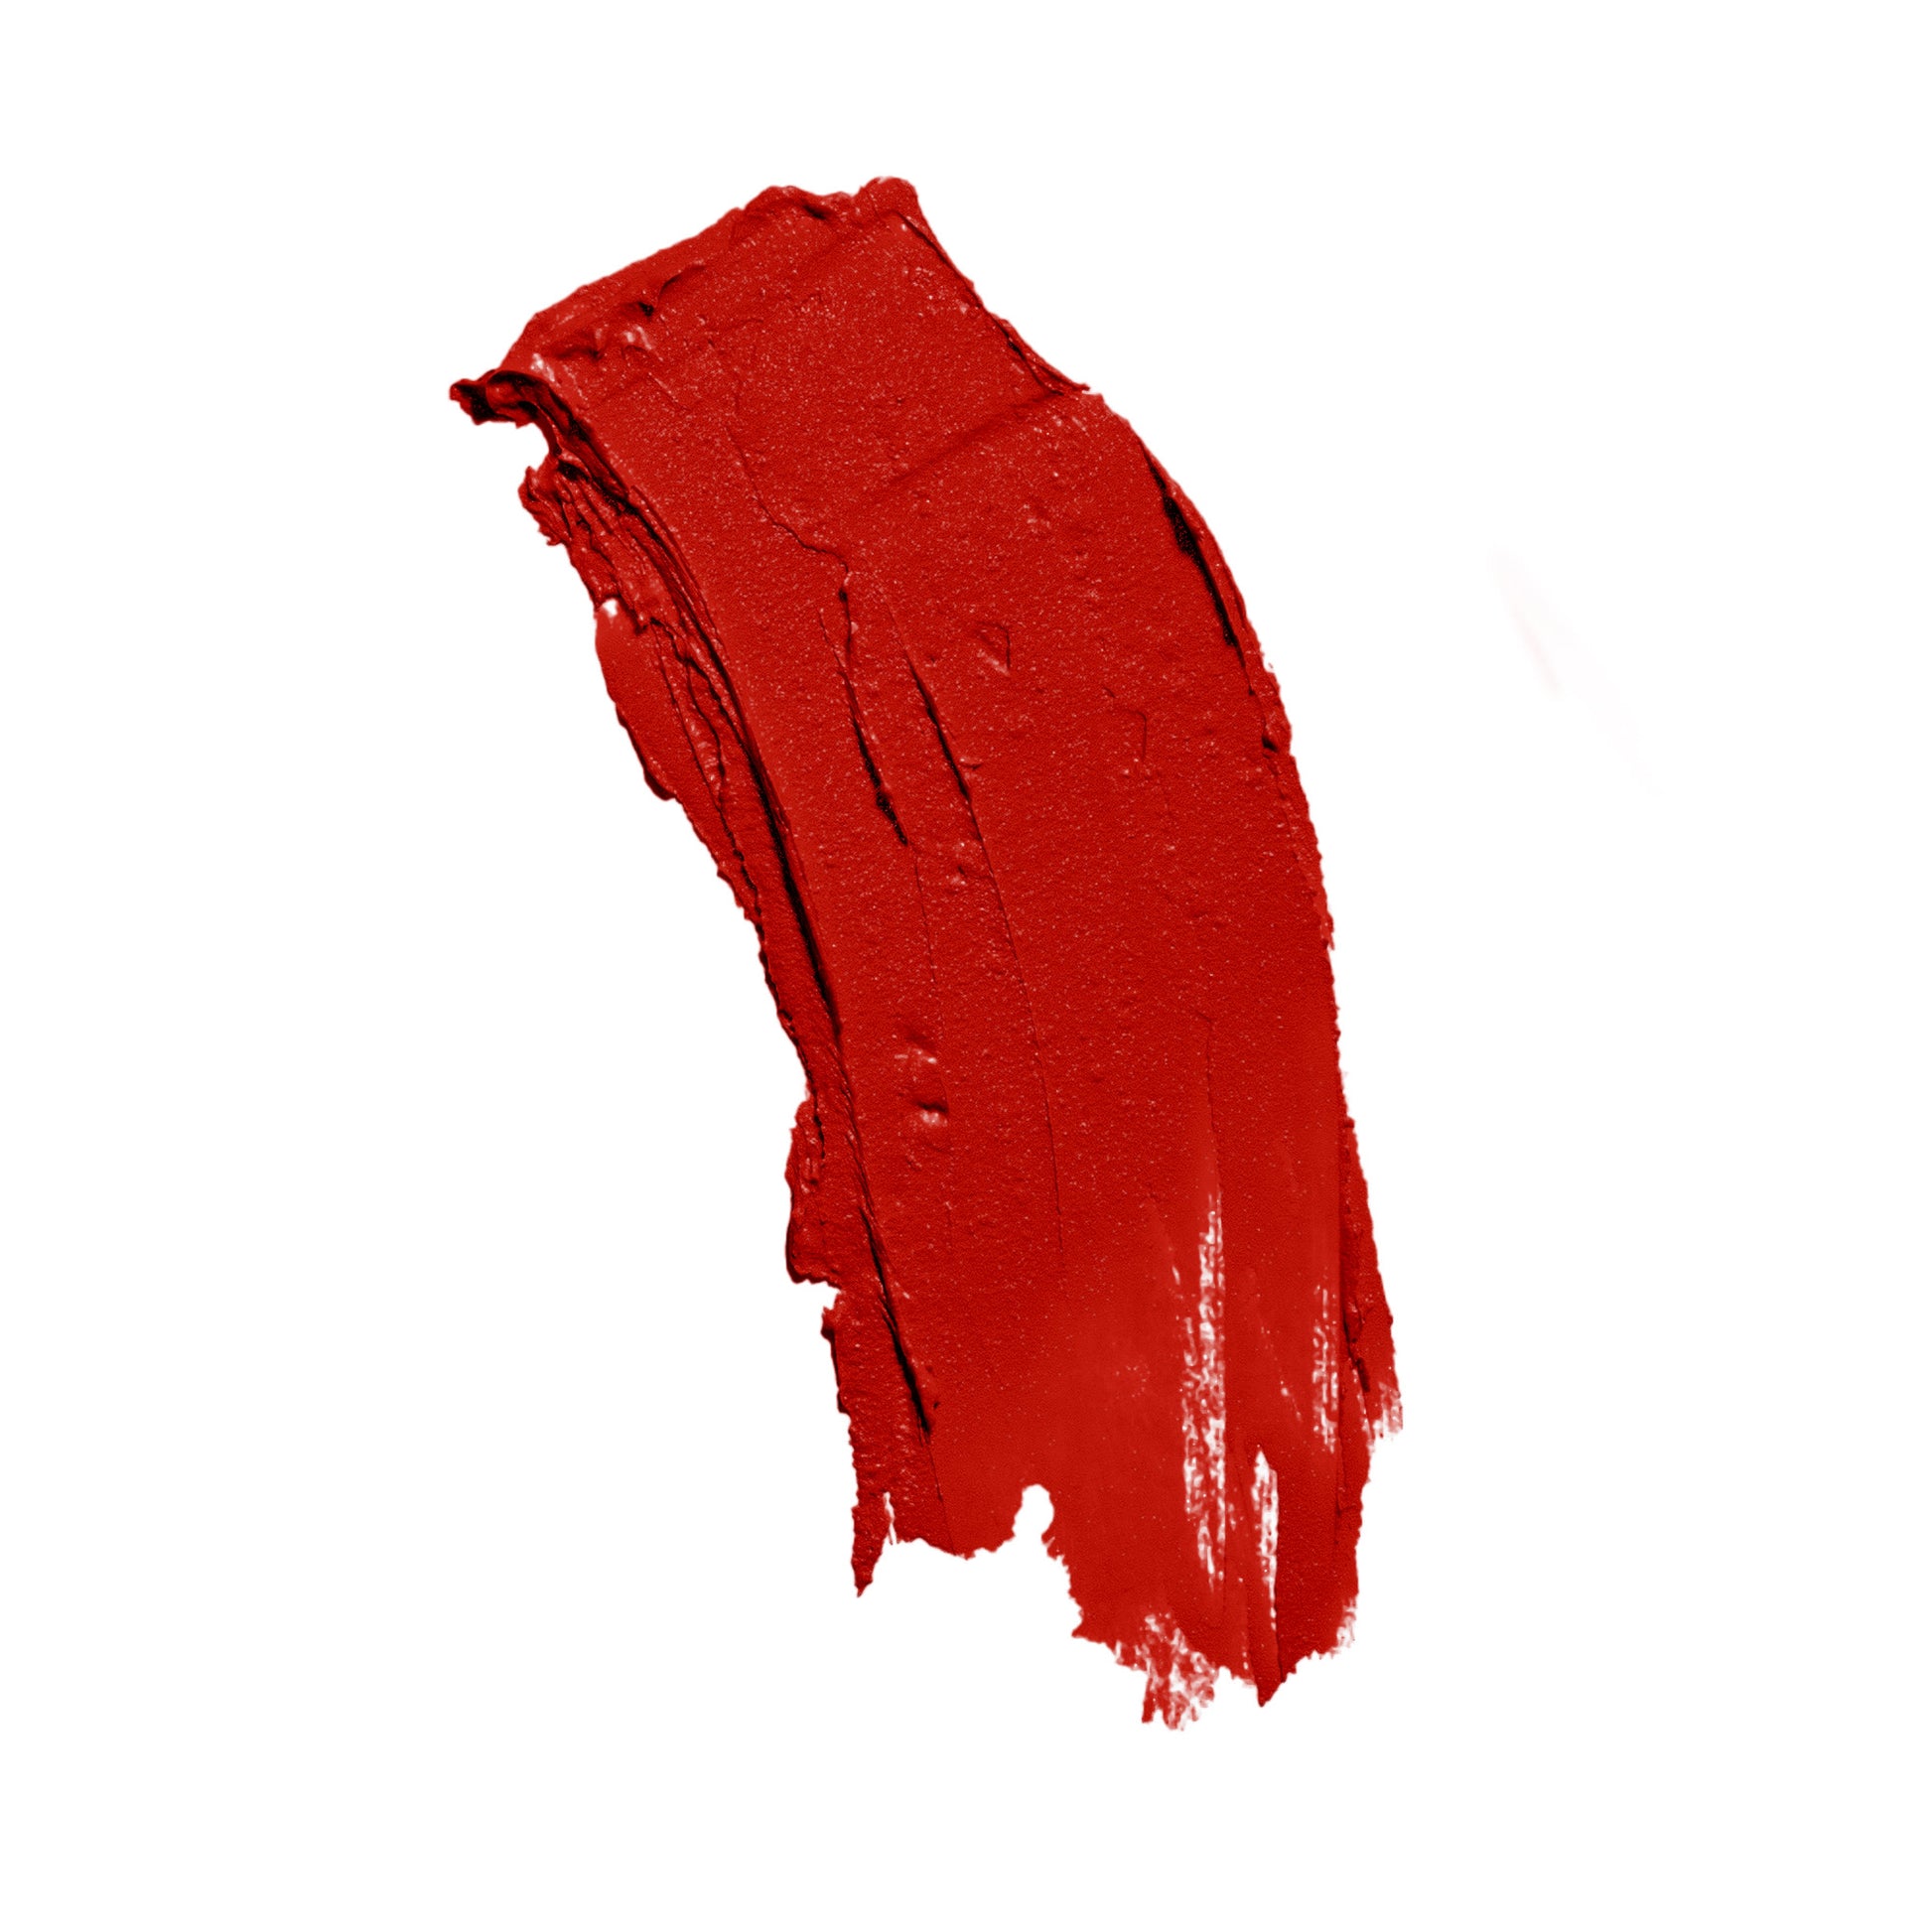 Natural-Cruelty-Free satin red lipstick showcased on a white background